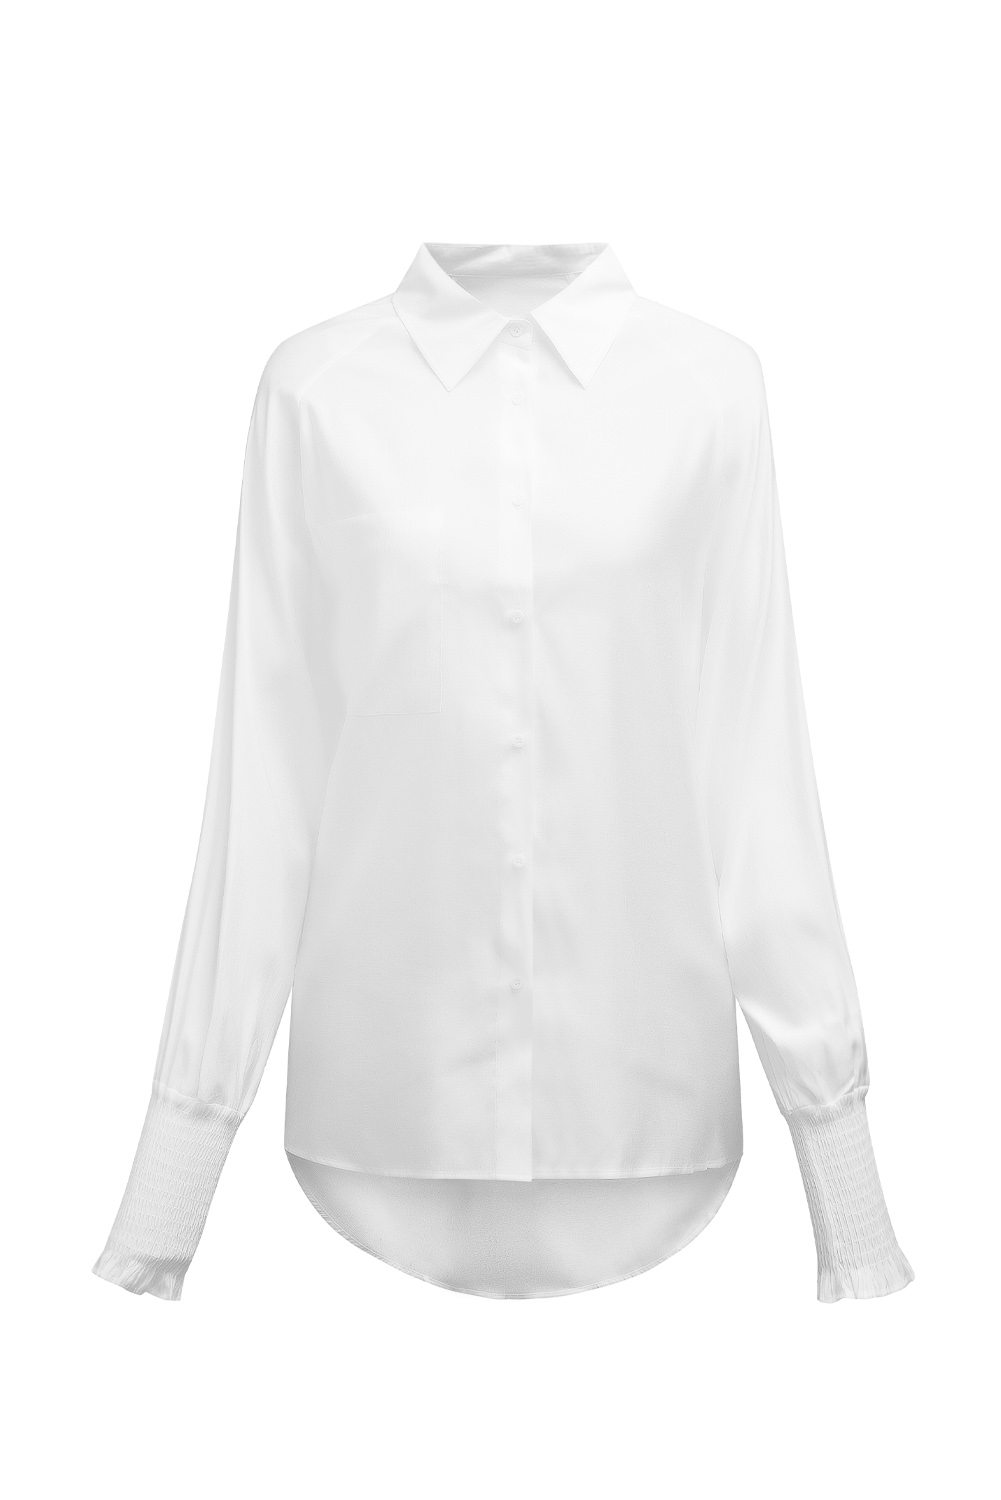 US$ 9.66 Drop-shipping White Billowy Sleeves Pocketed Shirt for Women